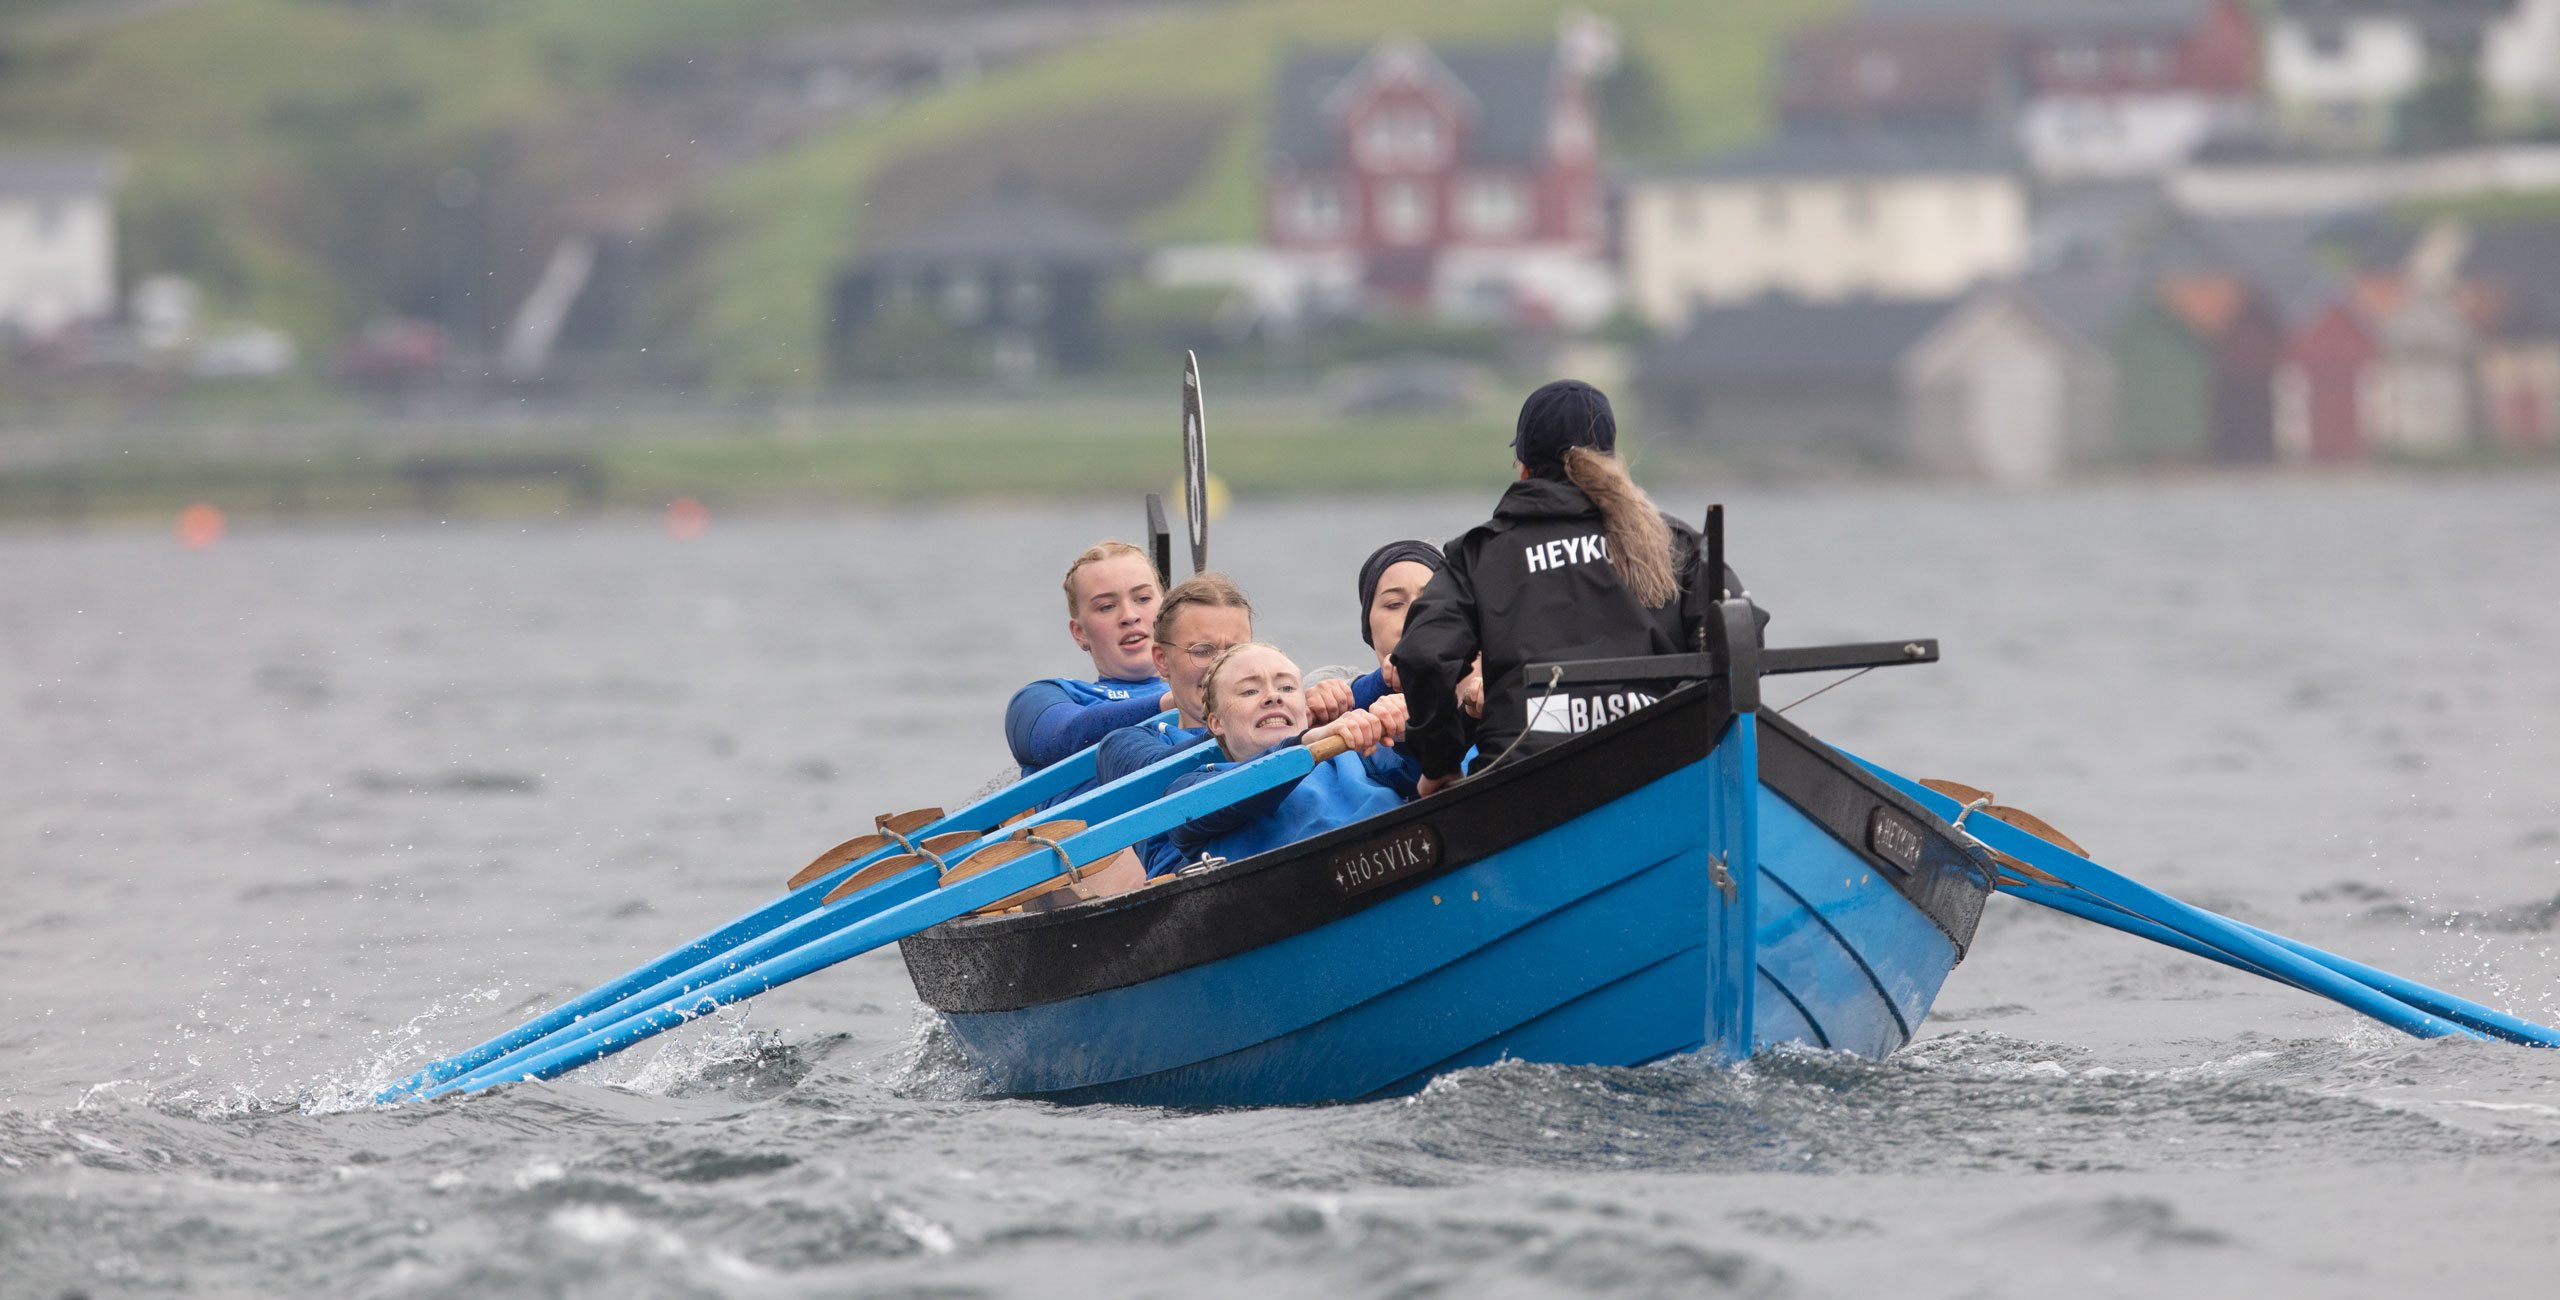 The Faroese Boat